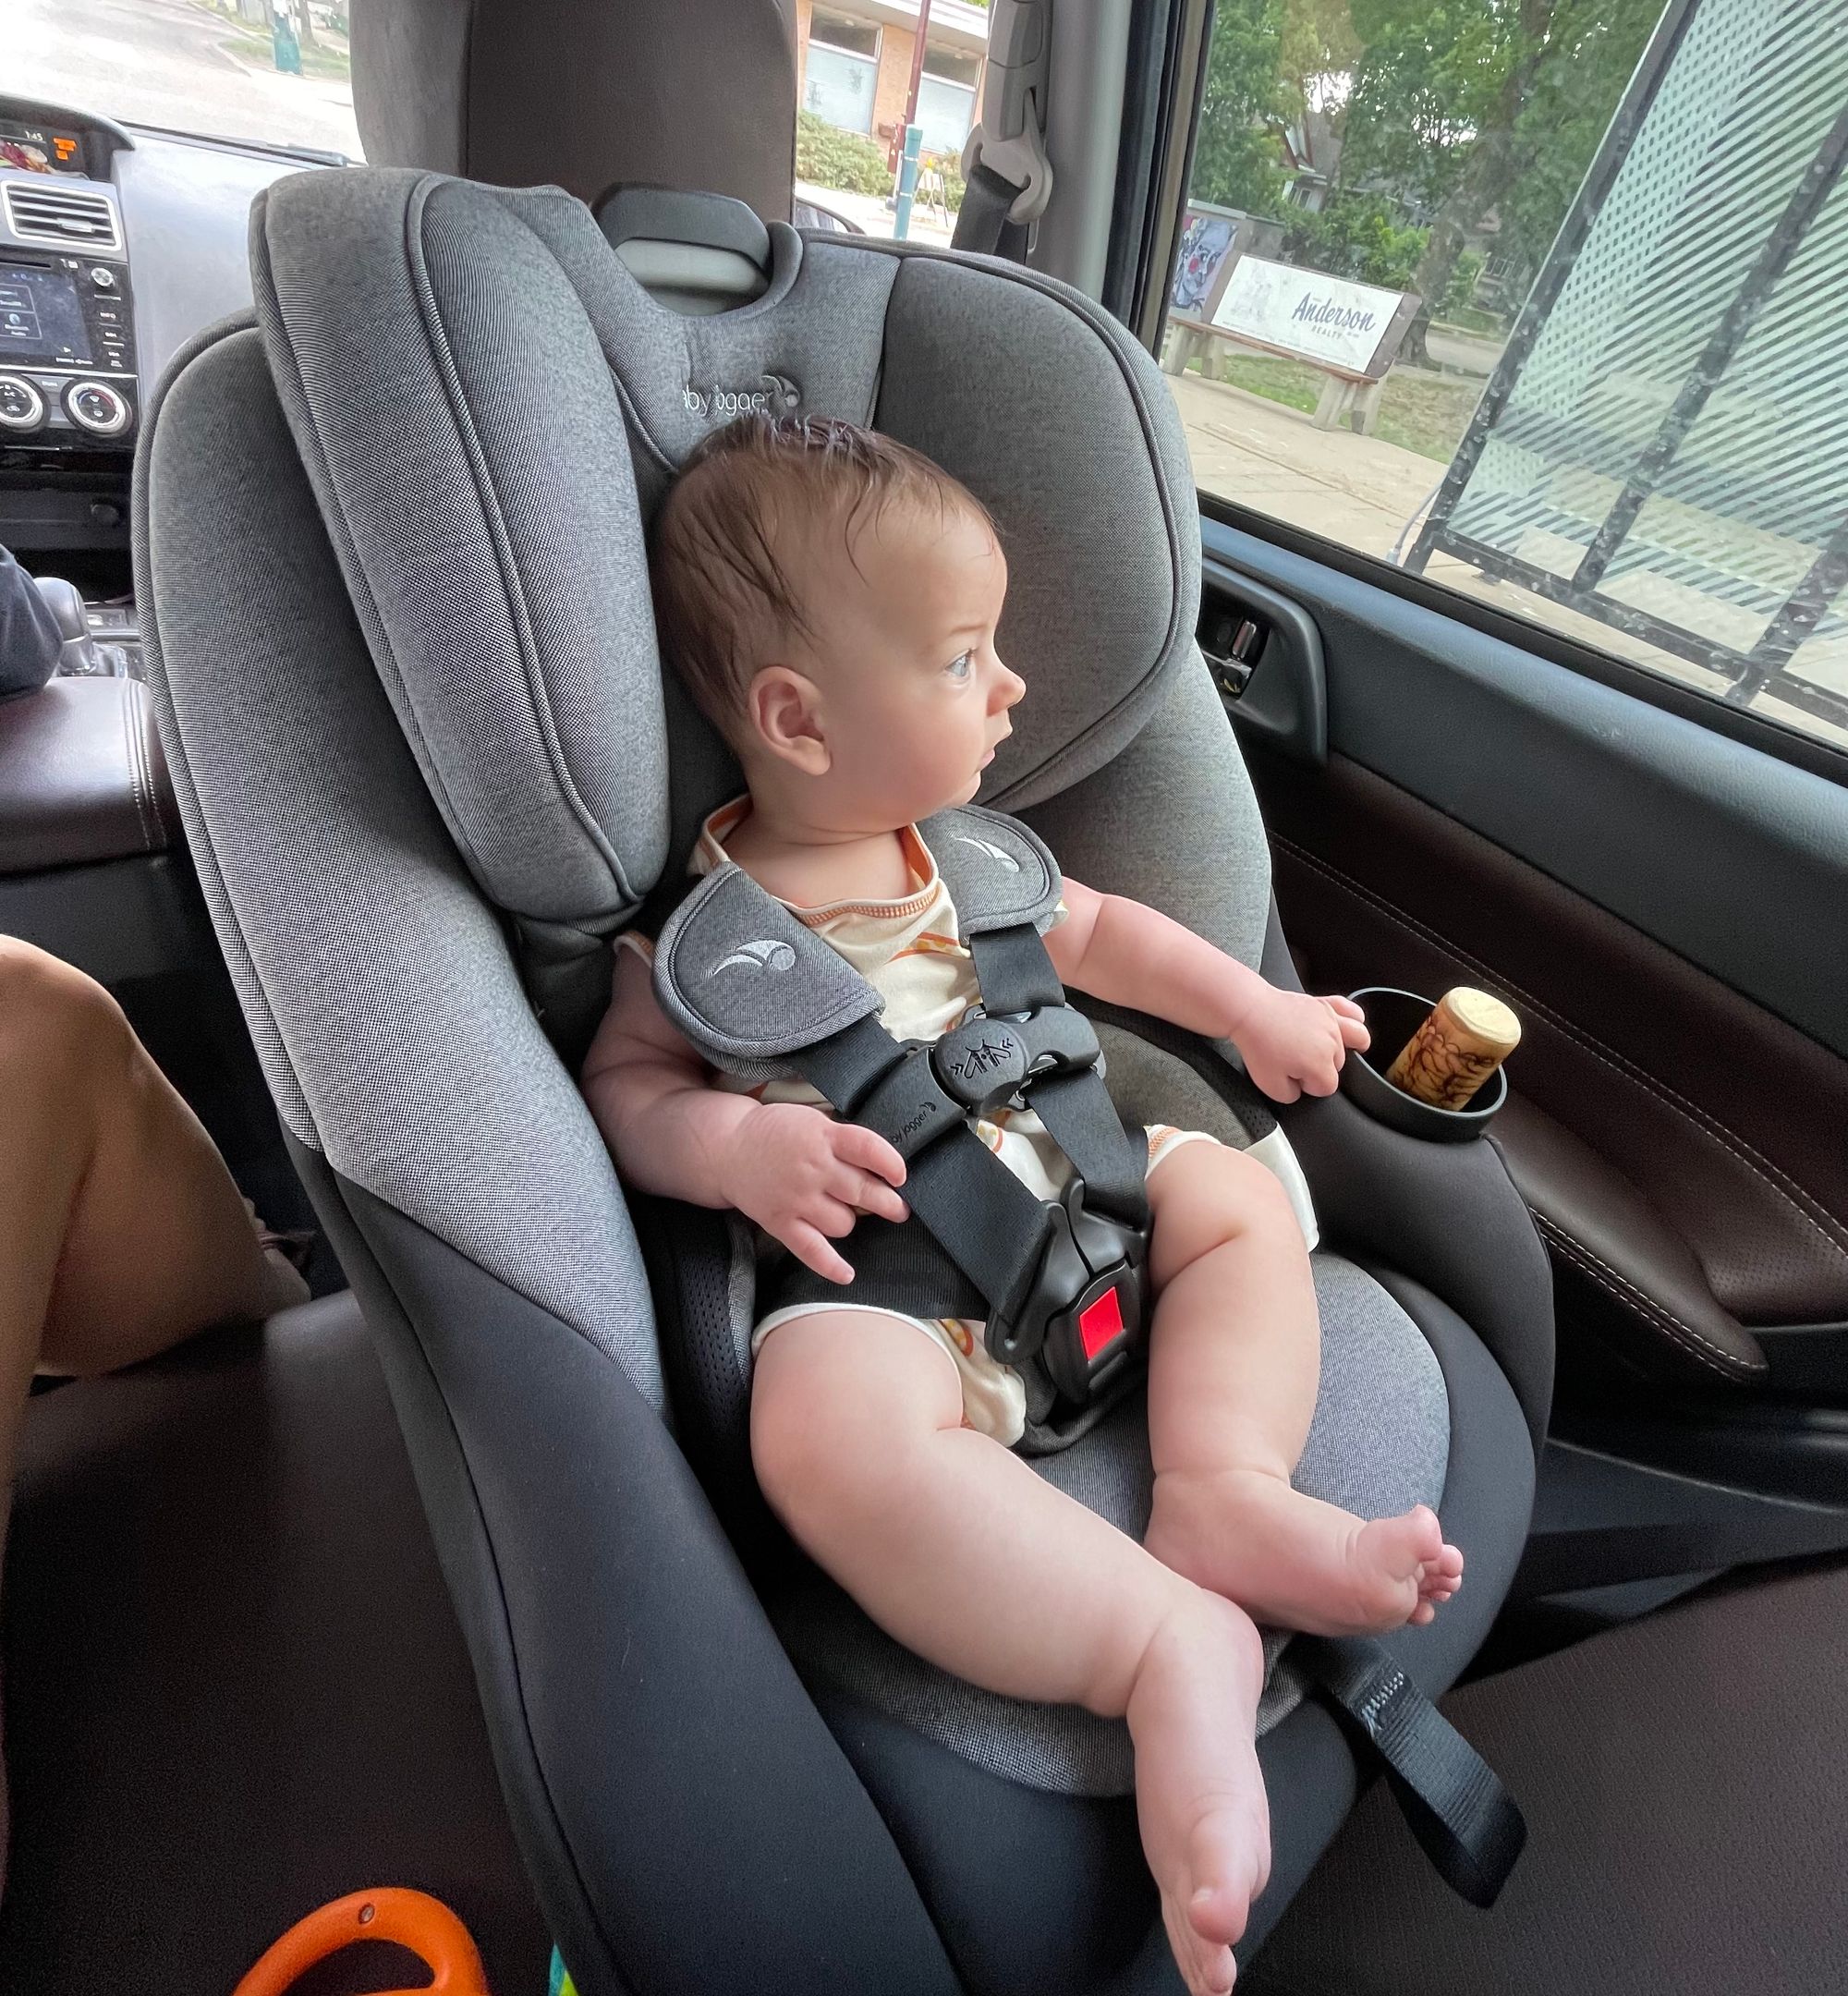 Infant in convertible Babyjogger carseat